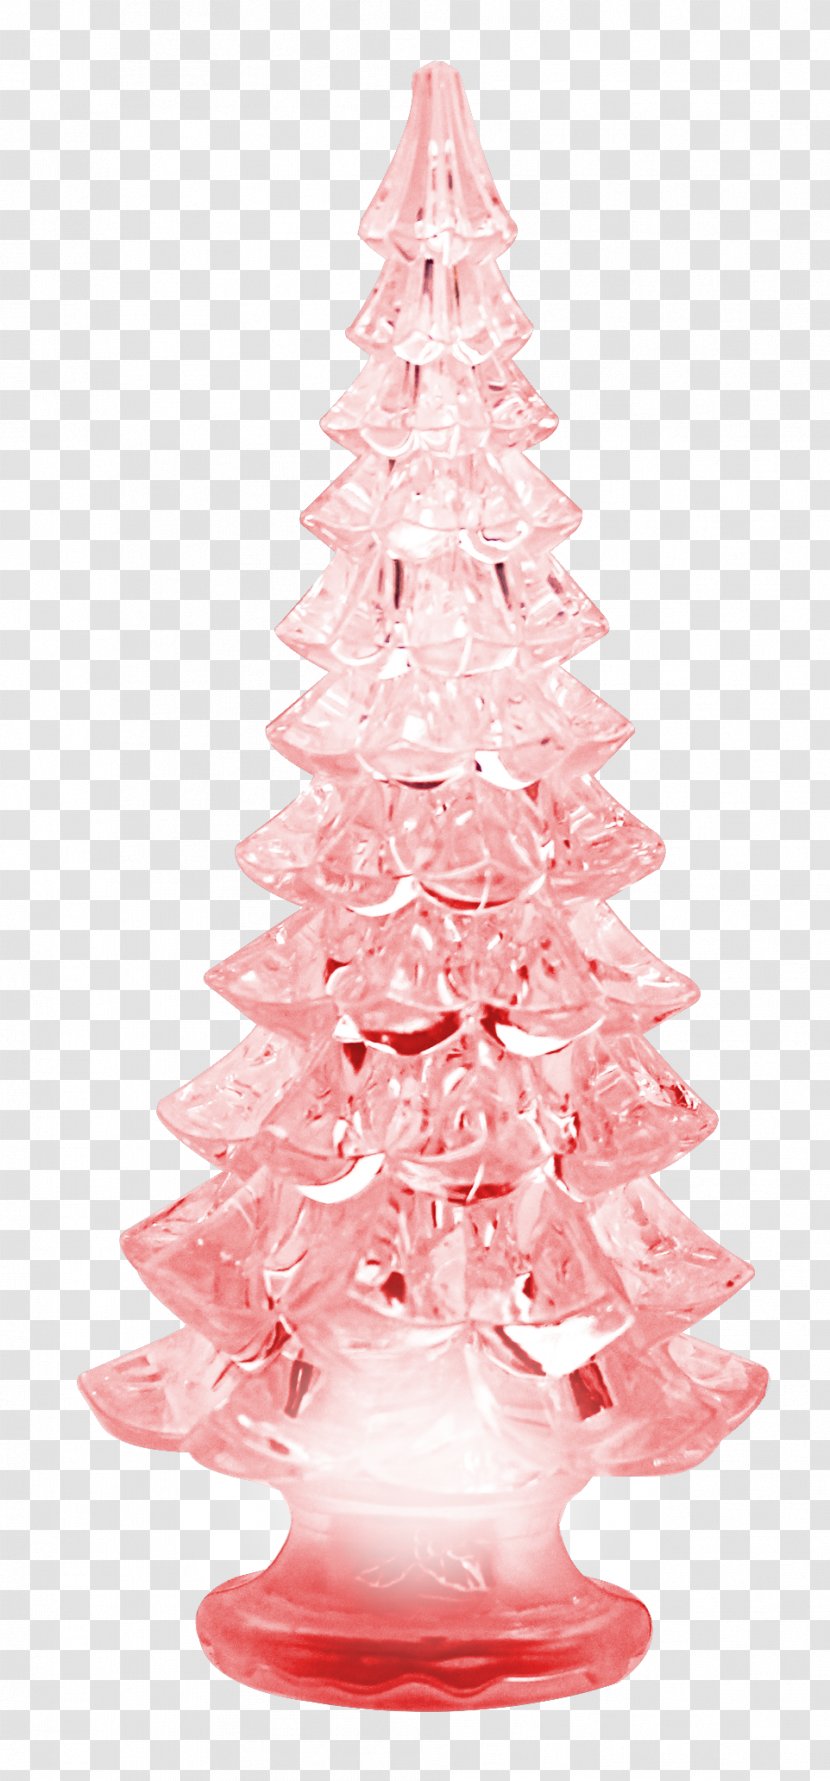 Christmas Tree Poly Plastic - Joias Transparent PNG